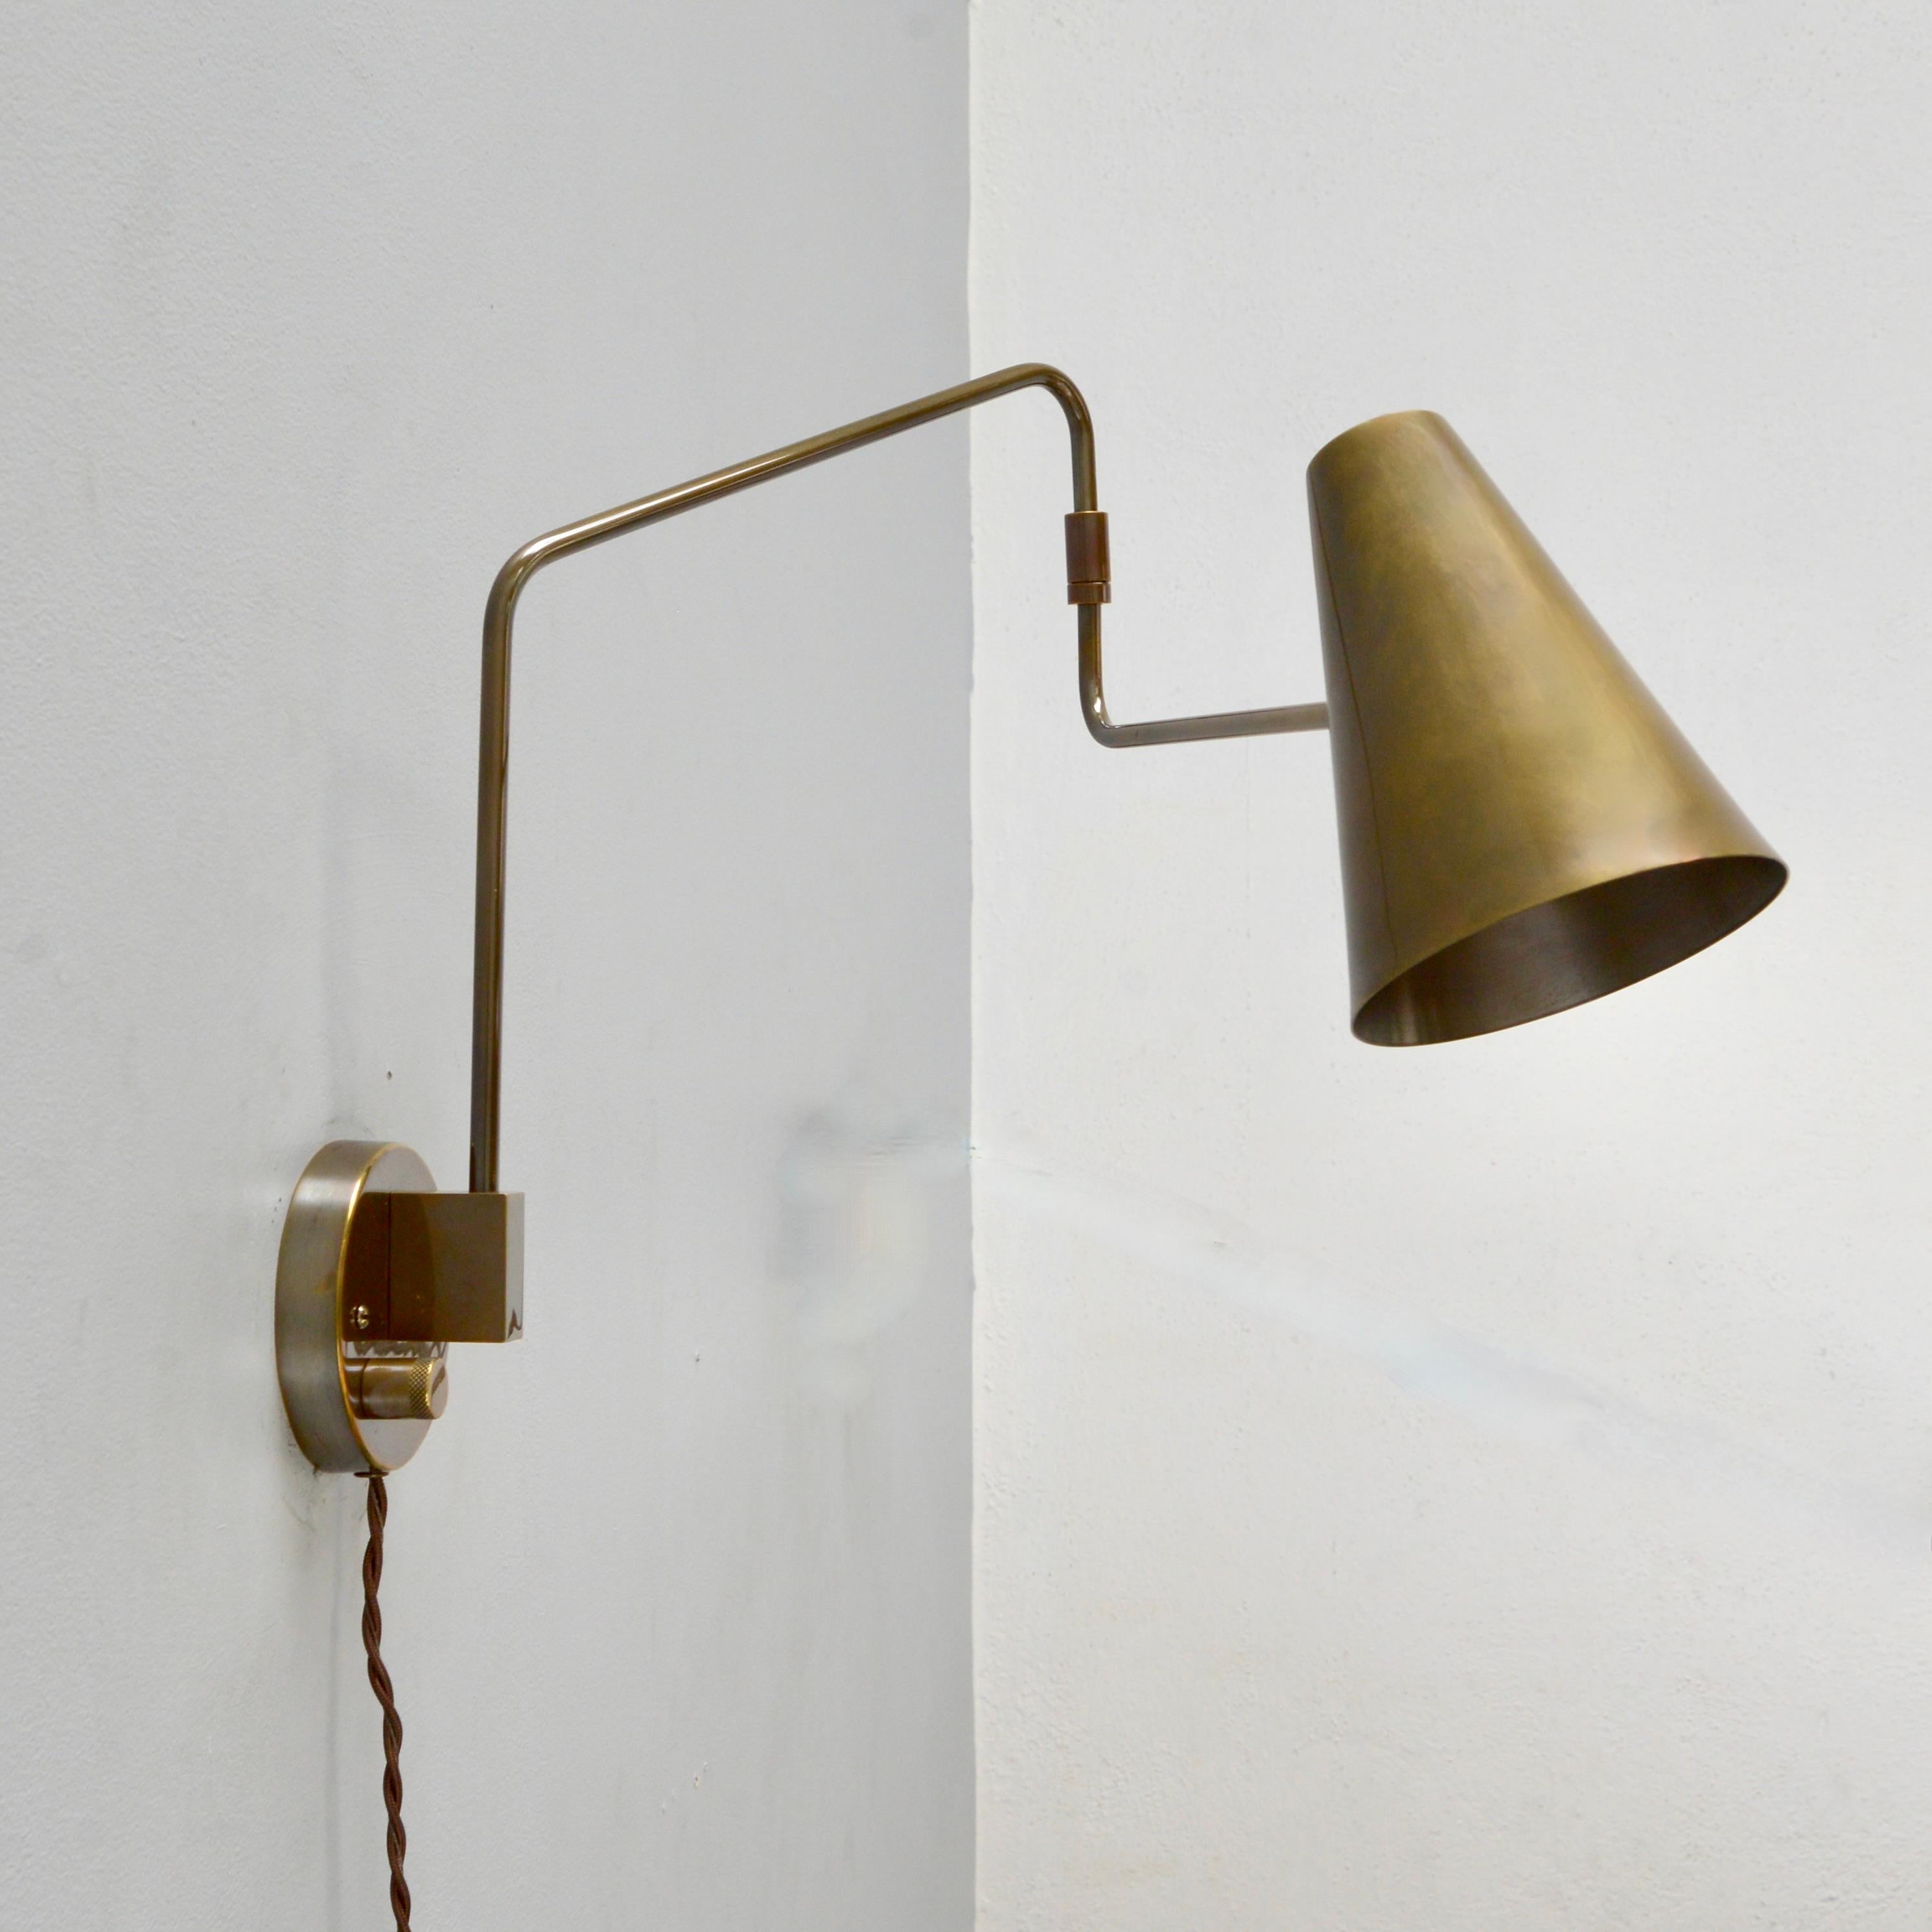 Beautiful plug-in version of our Lumfardo Luminaires brass LU swing sconce in patinated brass. Wired with an E26 medium based socket. Light bulb provided as well as all mounting hardware. Priced individually.

Measurements: 
Height 15”
Depth/length: